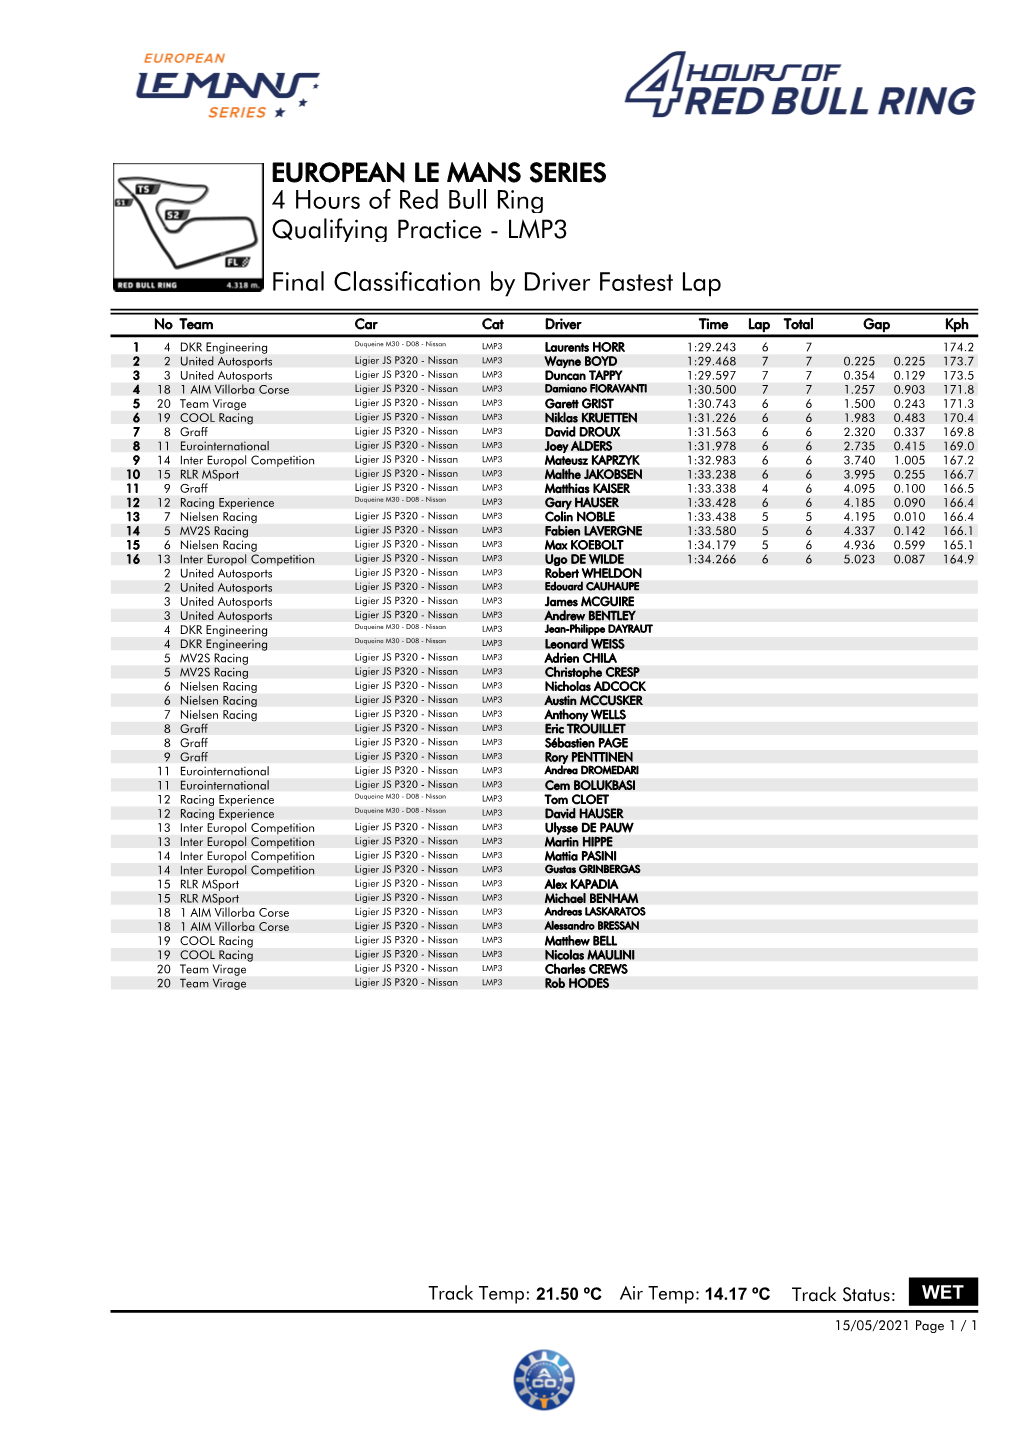 Final Classification by Driver Fastest Lap Qualifying Practice